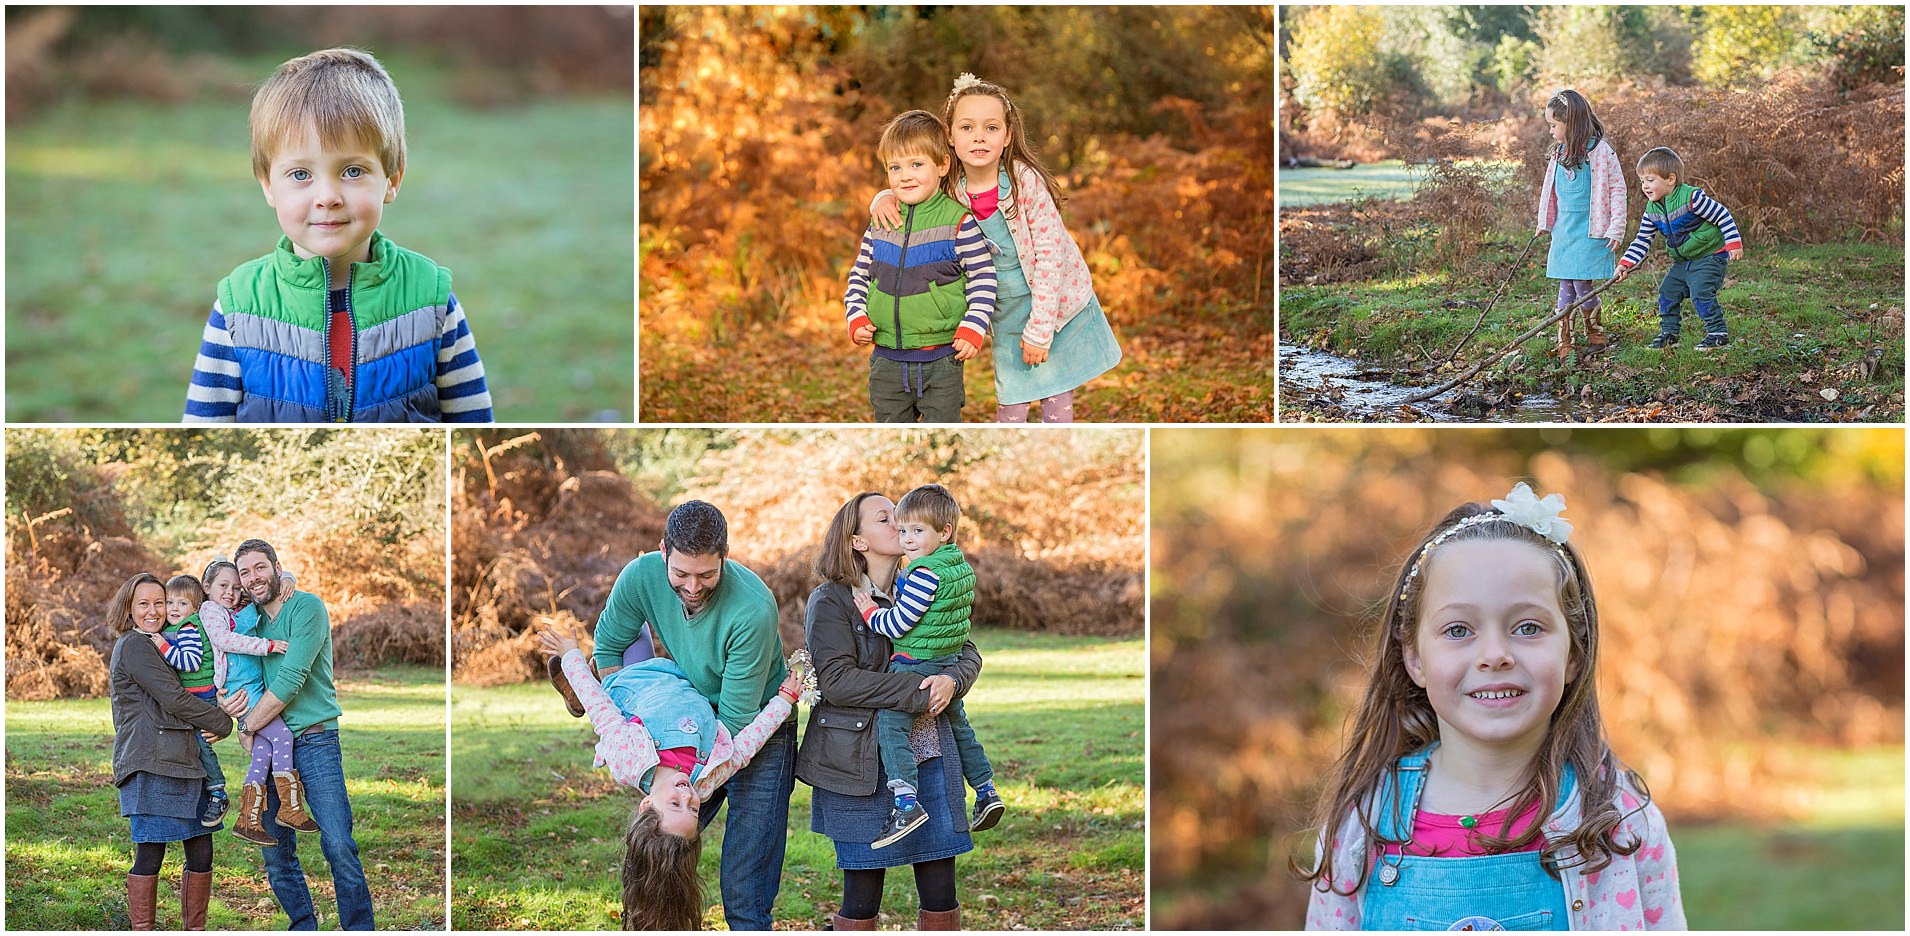 New Forest Outdoor family photoshoot #familyphotography